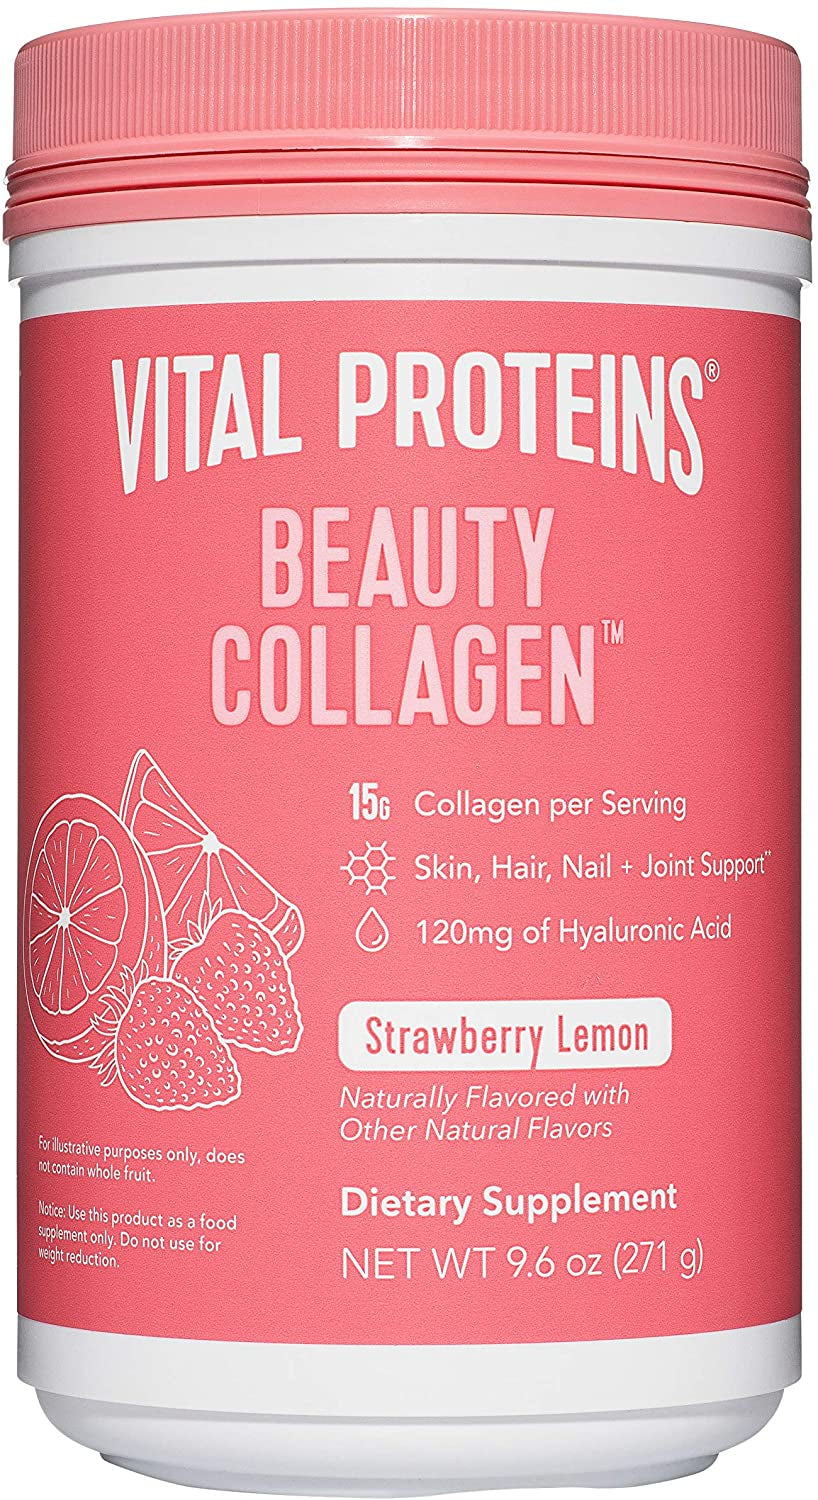 Vital Proteins Beauty Collagen Peptides Powder Supplement for Women, 120Mg of Hyaluronic Acid - 15G of Collagen per Serving - Enhance Skin Elasticity and Hydration - Strawberry Lemon - 9.6Oz Canister - Free & Fast Delivery